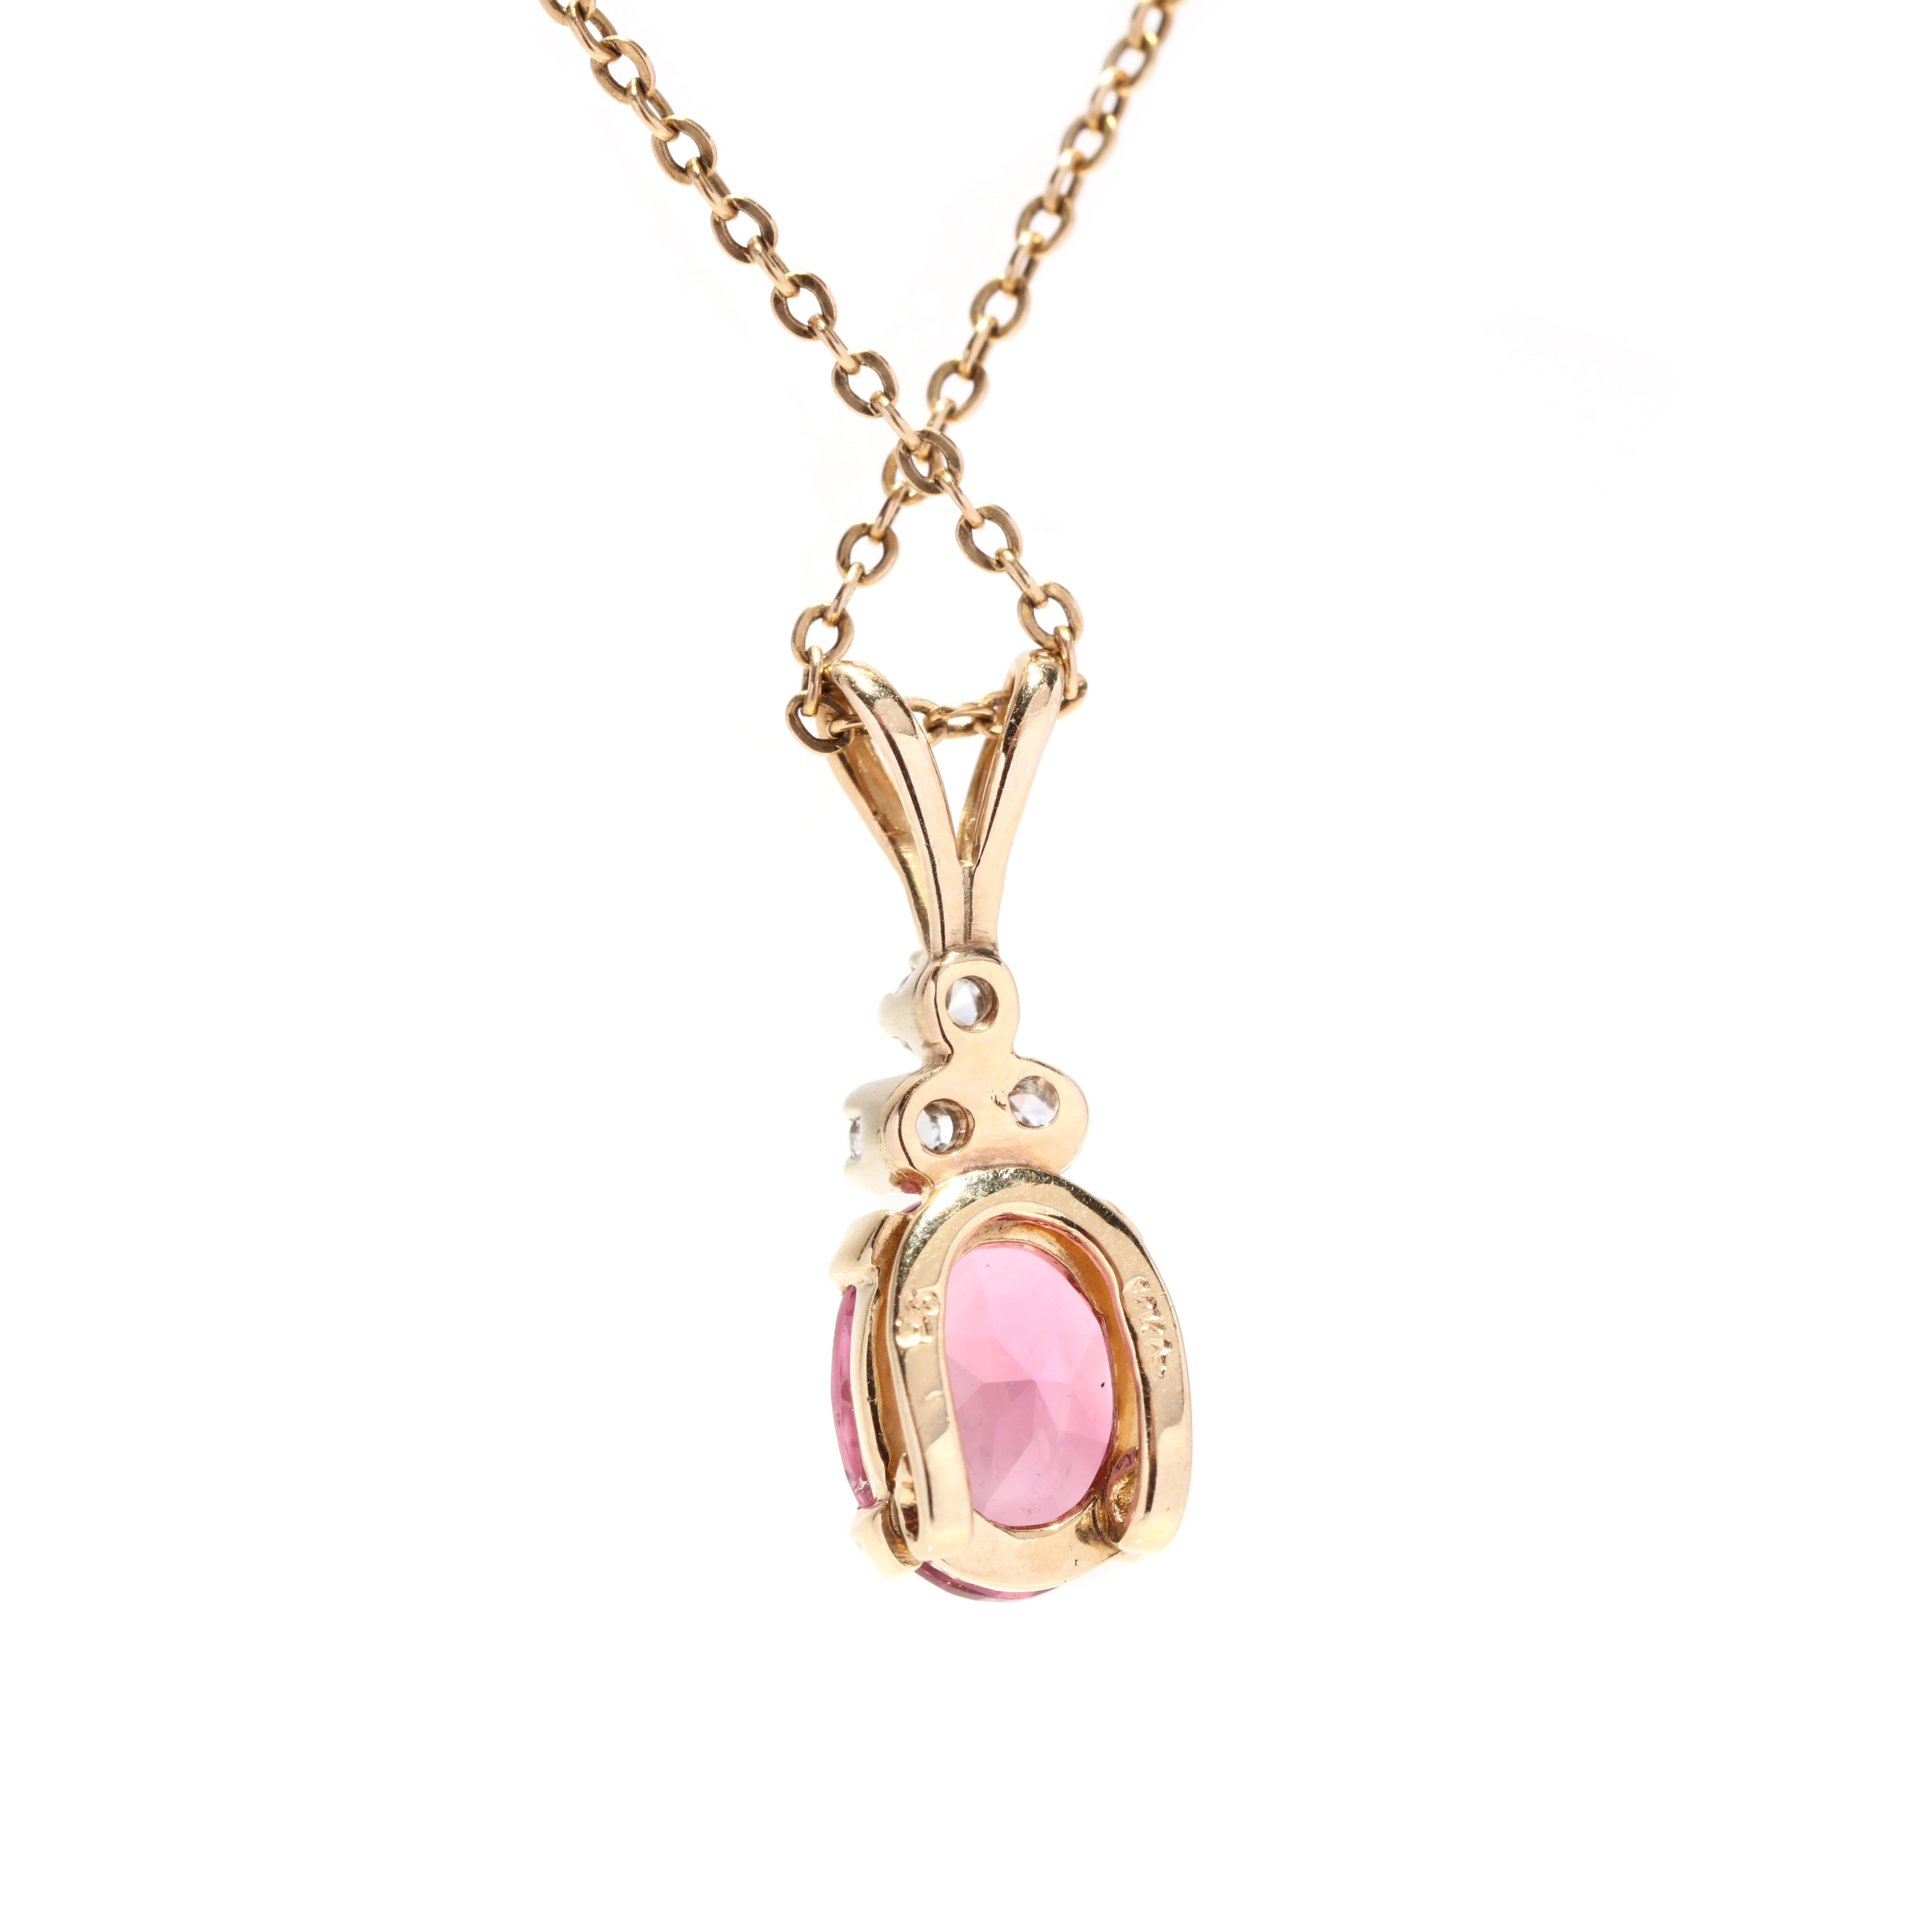 A vintage 14 karat yellow gold pink tourmaline and diamond pendant necklace. This necklace features a prong set oval cut pink tourmaline weighing approximately 2.10 carats with three diamonds set atop weighing approximately .09 total carats and